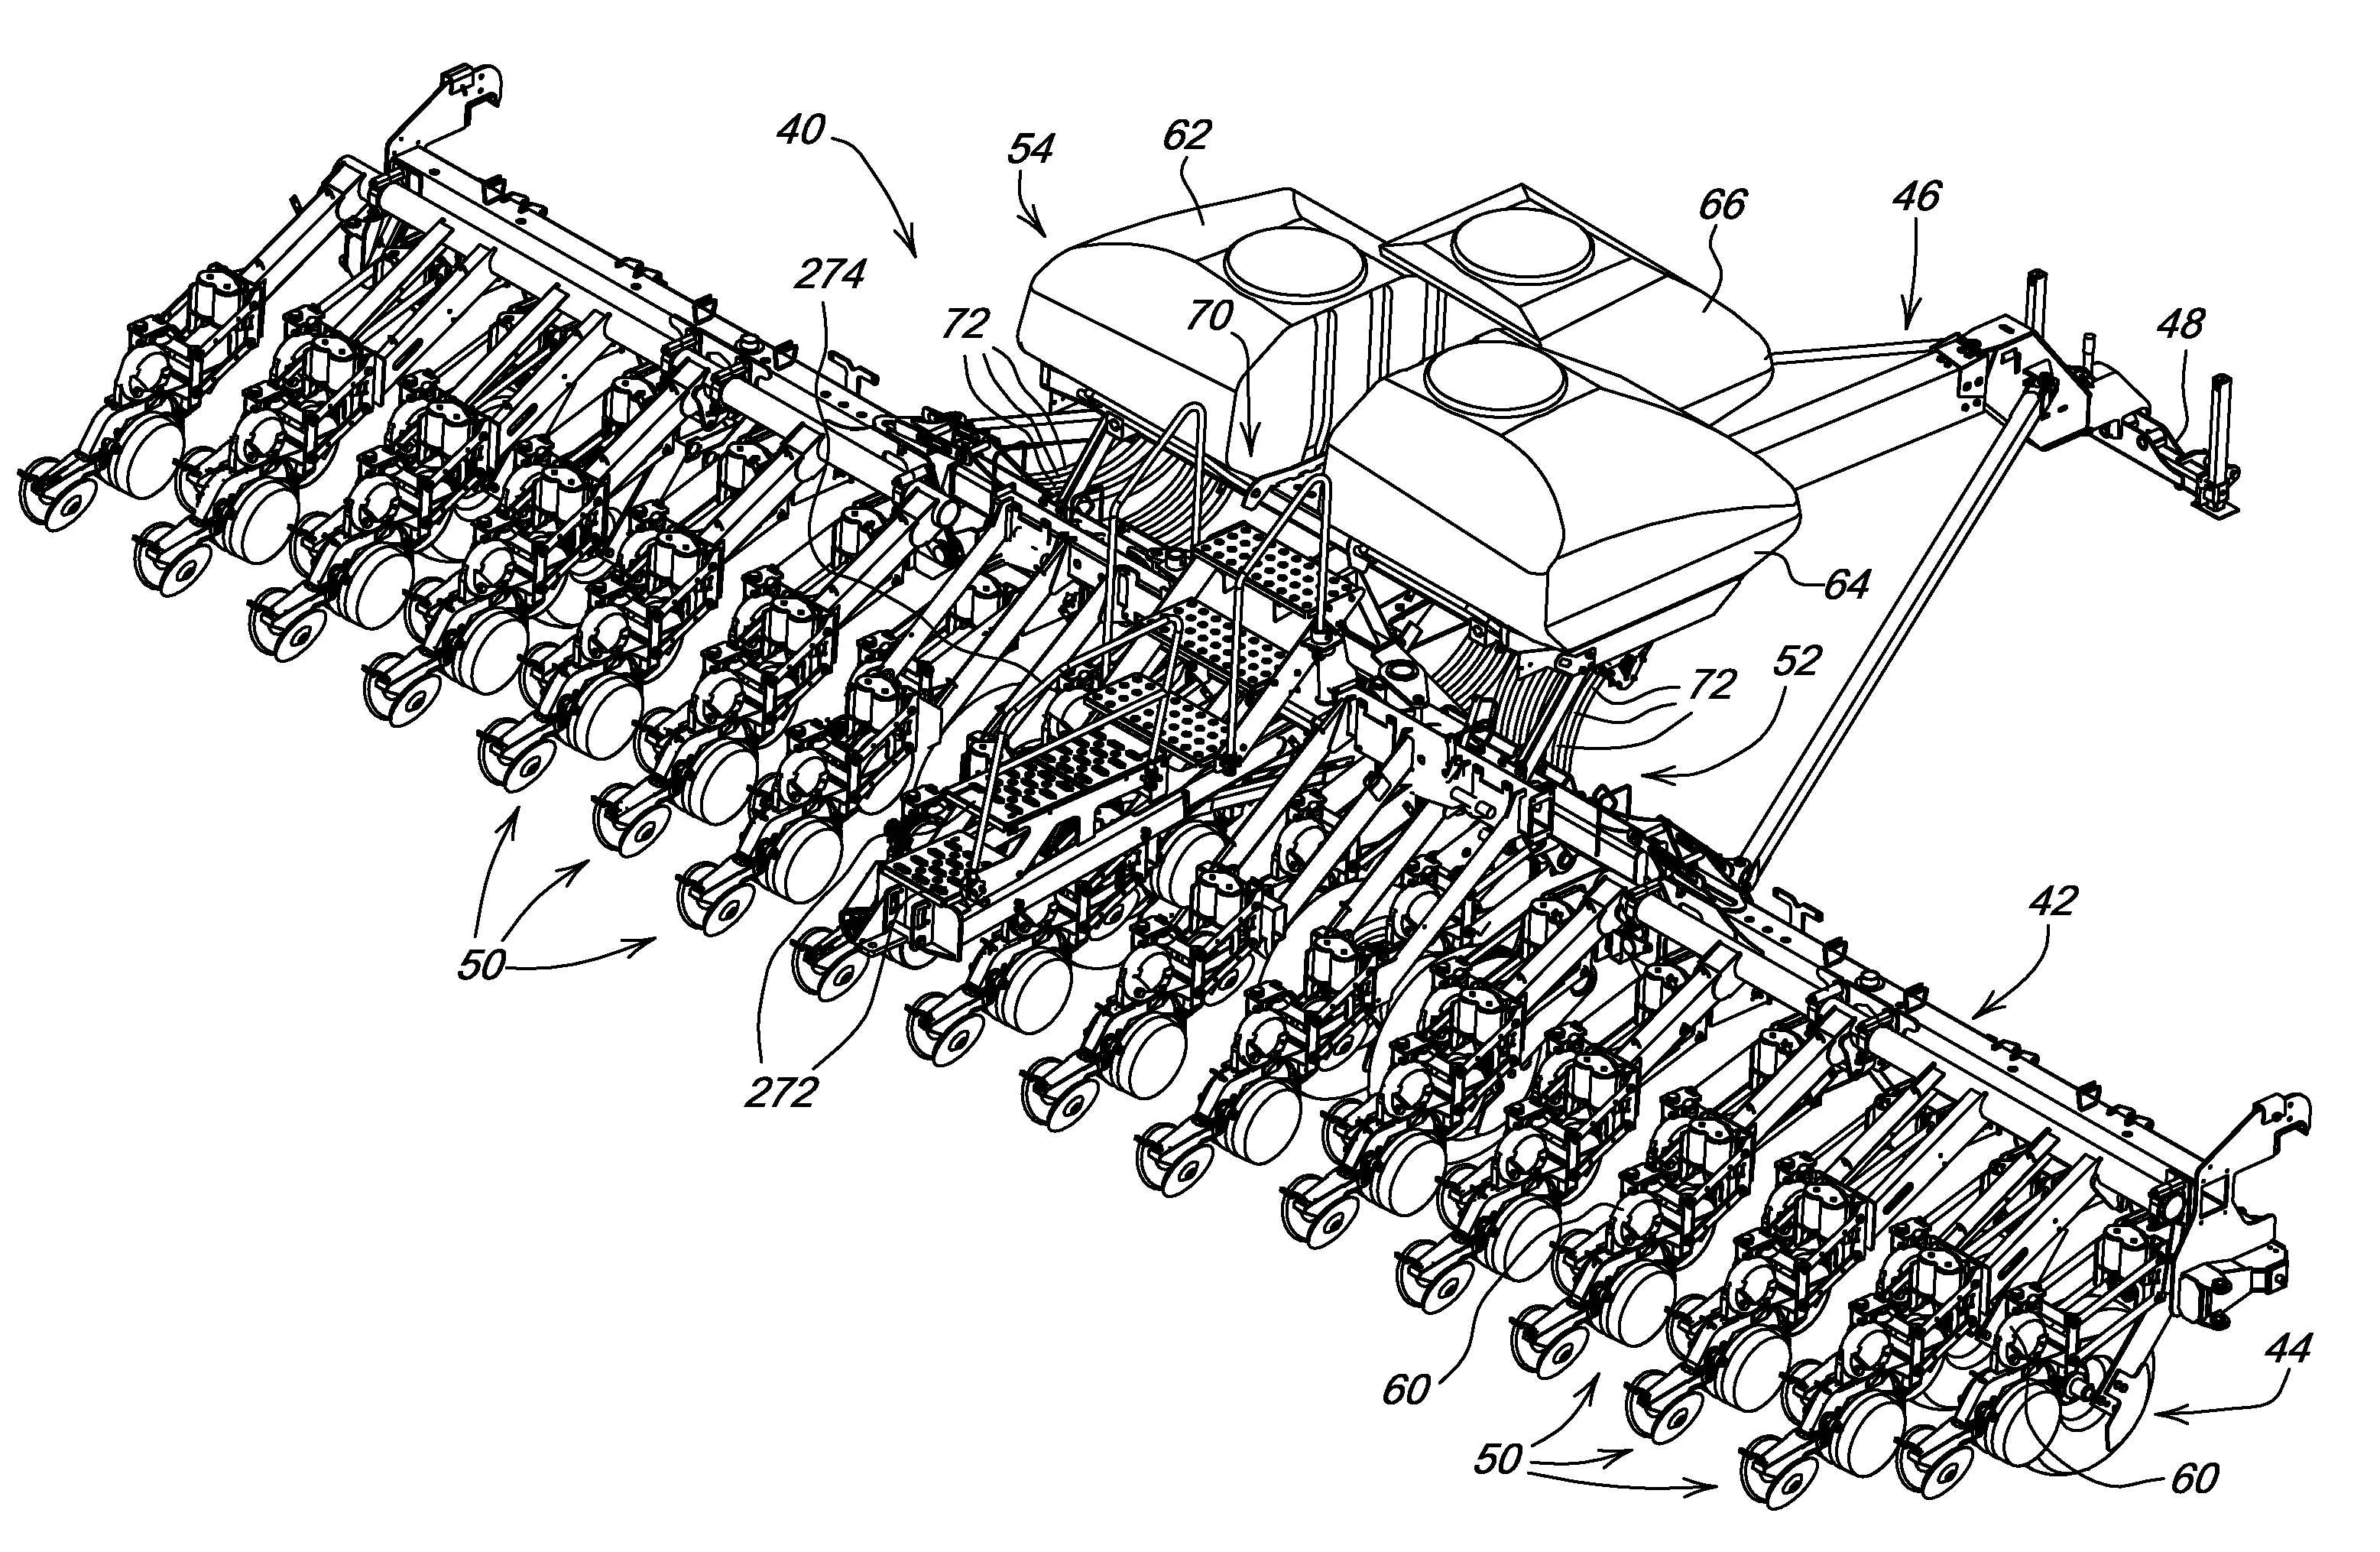 Seed hopper and routing structure for varying material delivery to row units